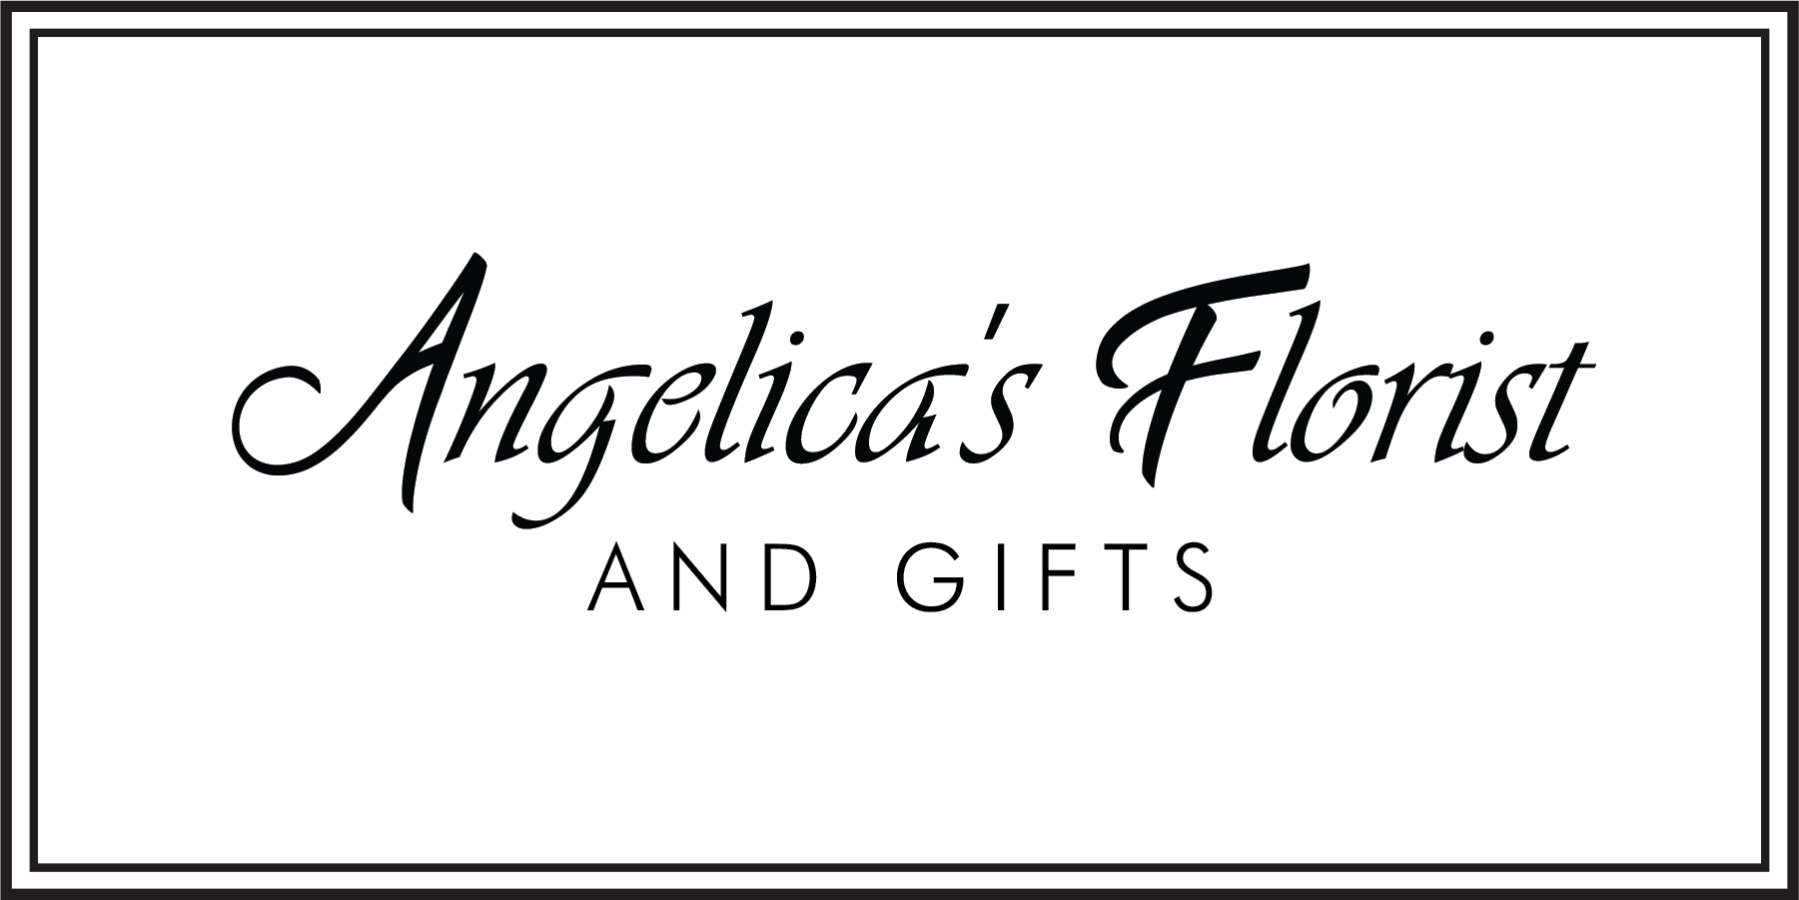 Angelica's Florist and Gifts